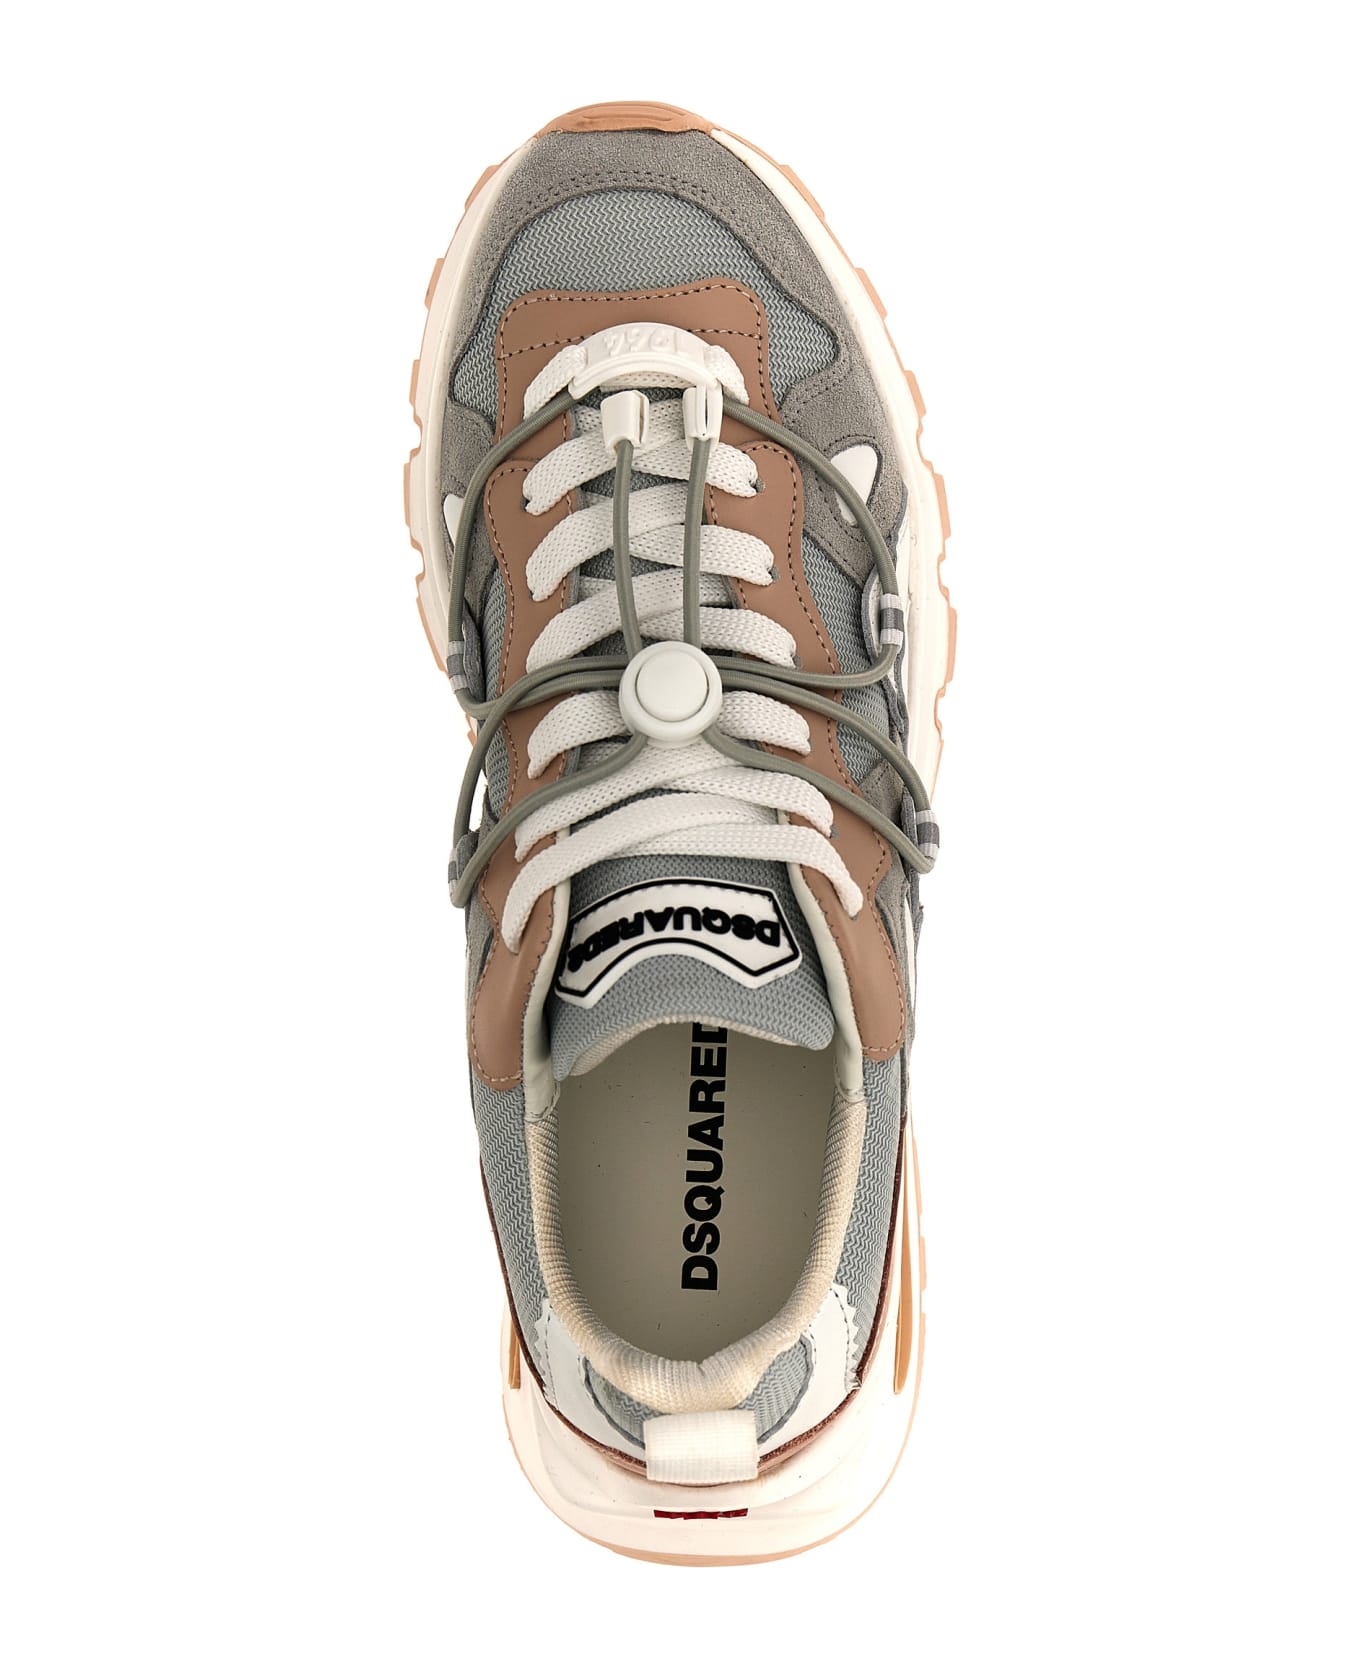 Dsquared2 Run Ds2 Sneakers - Grey